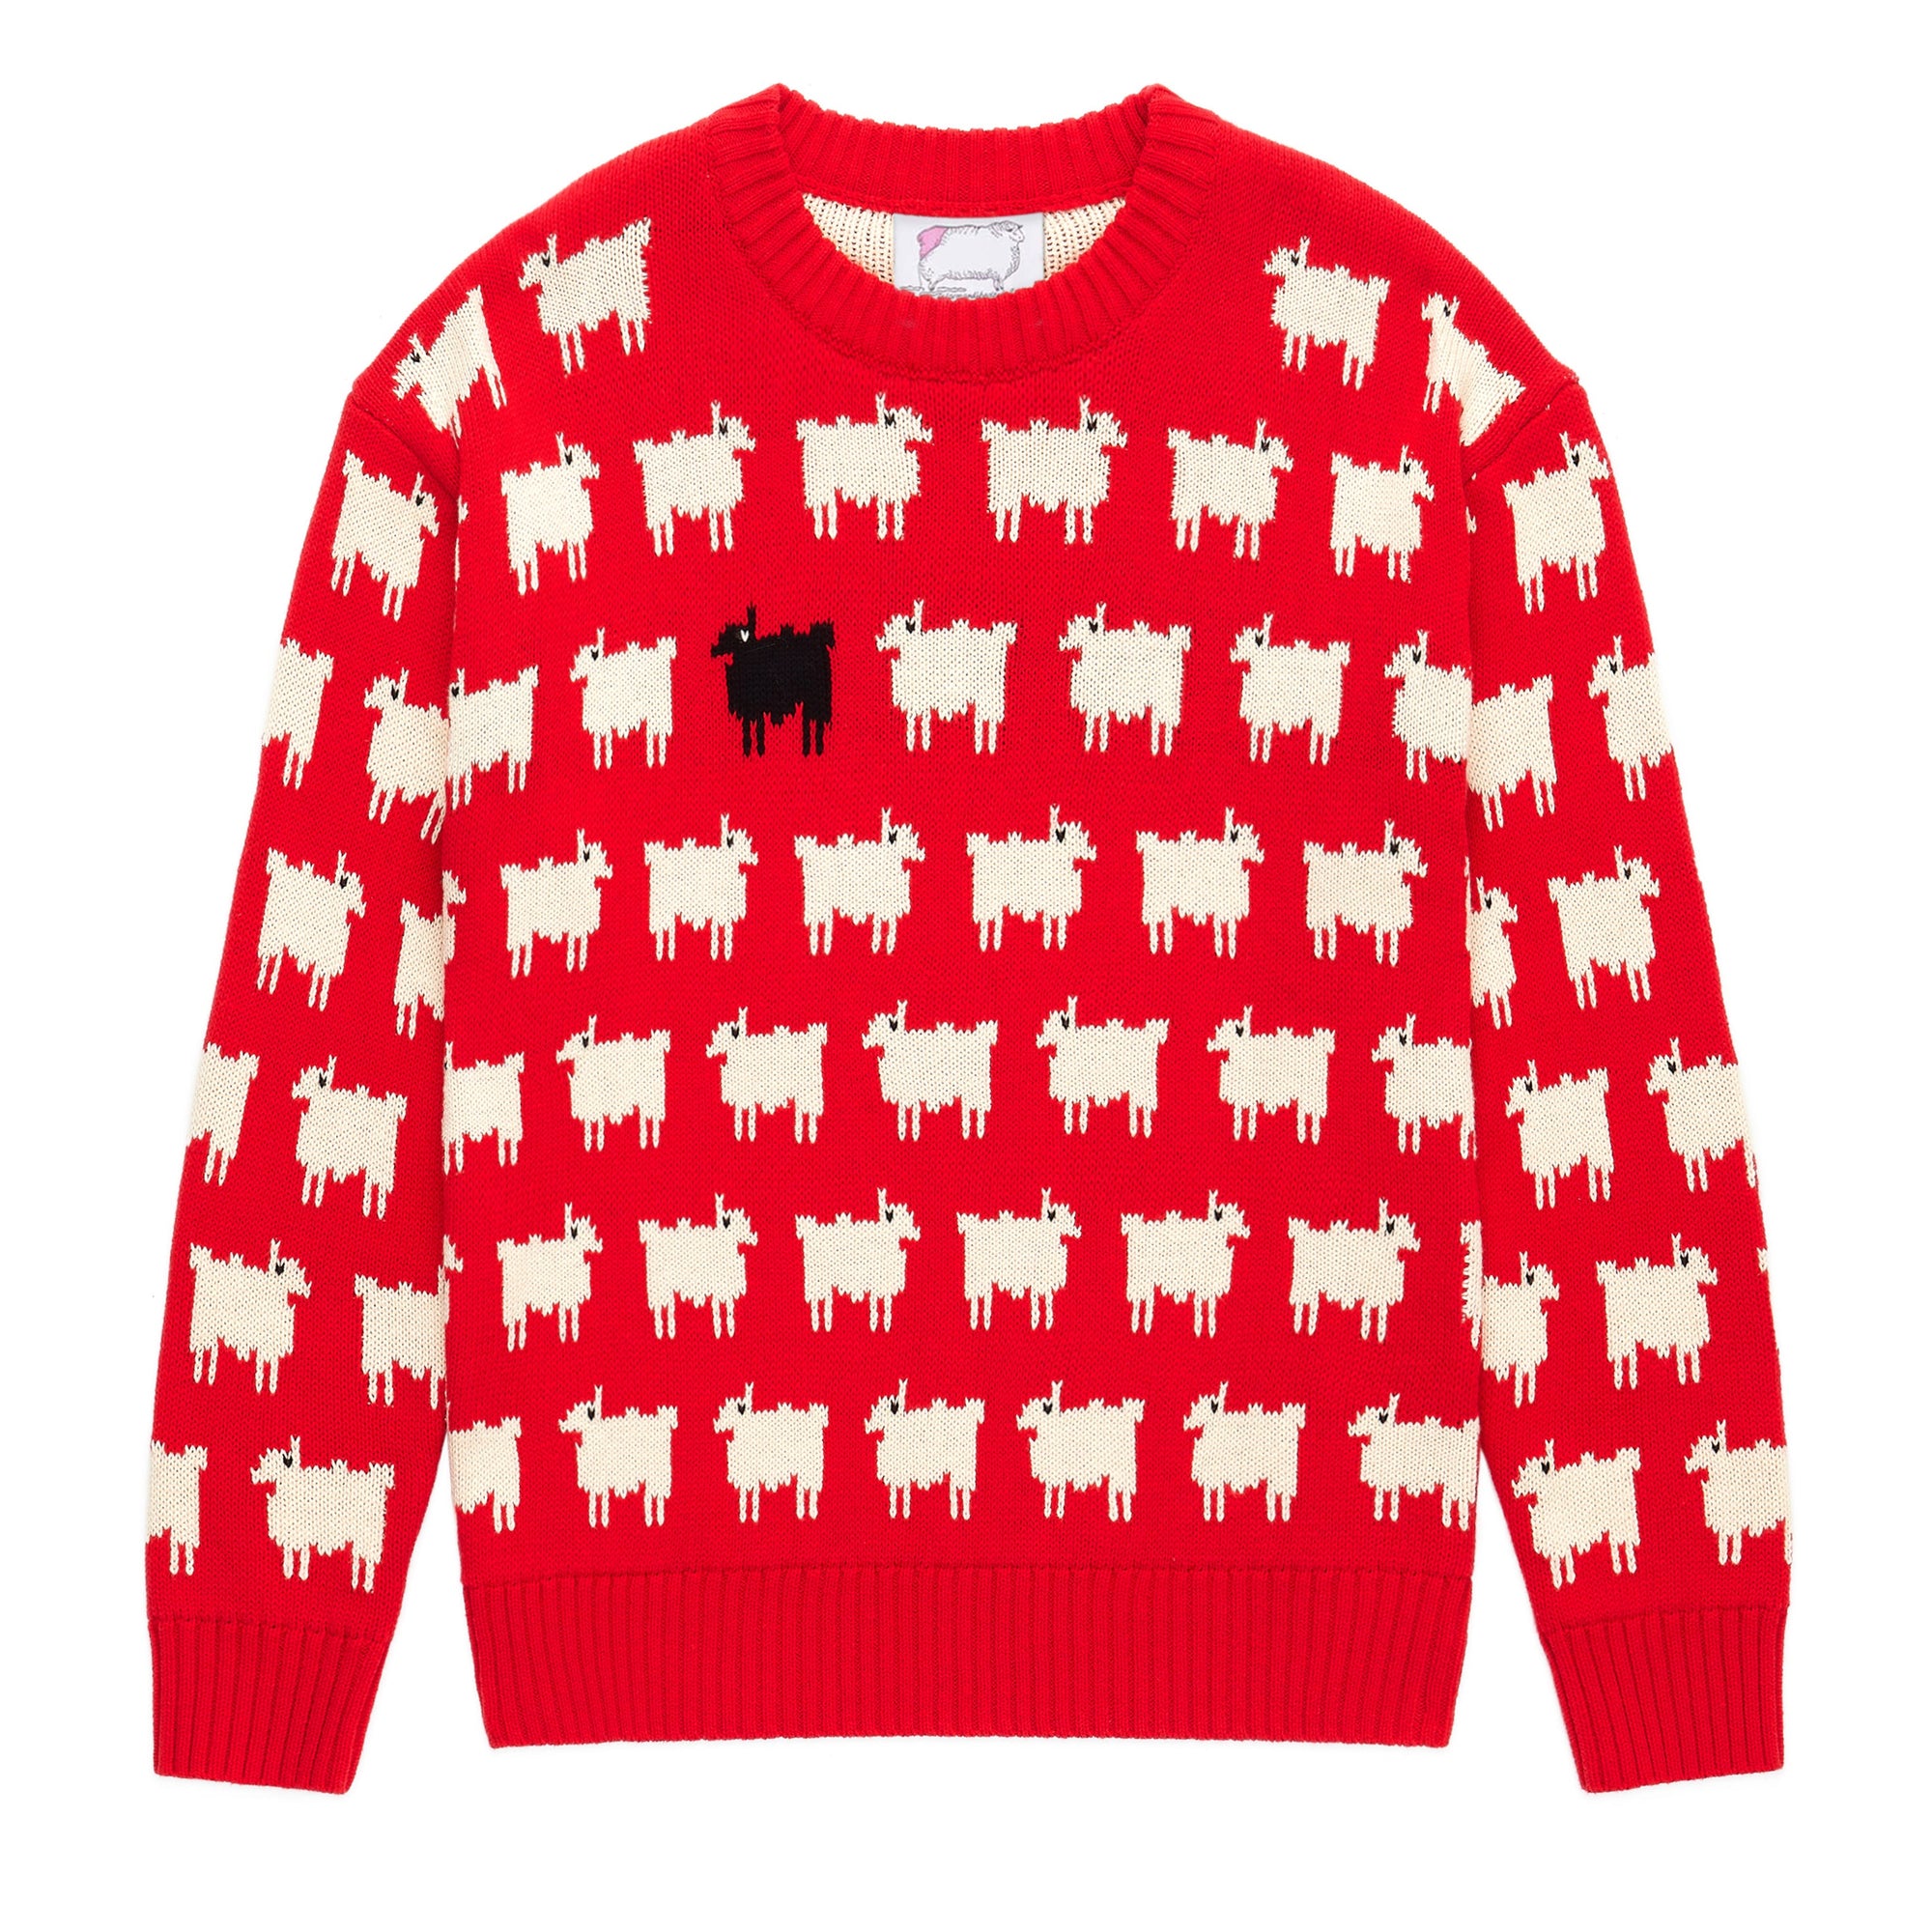 Rowing Blazers Mens Cotton Sheep Sweater - Red